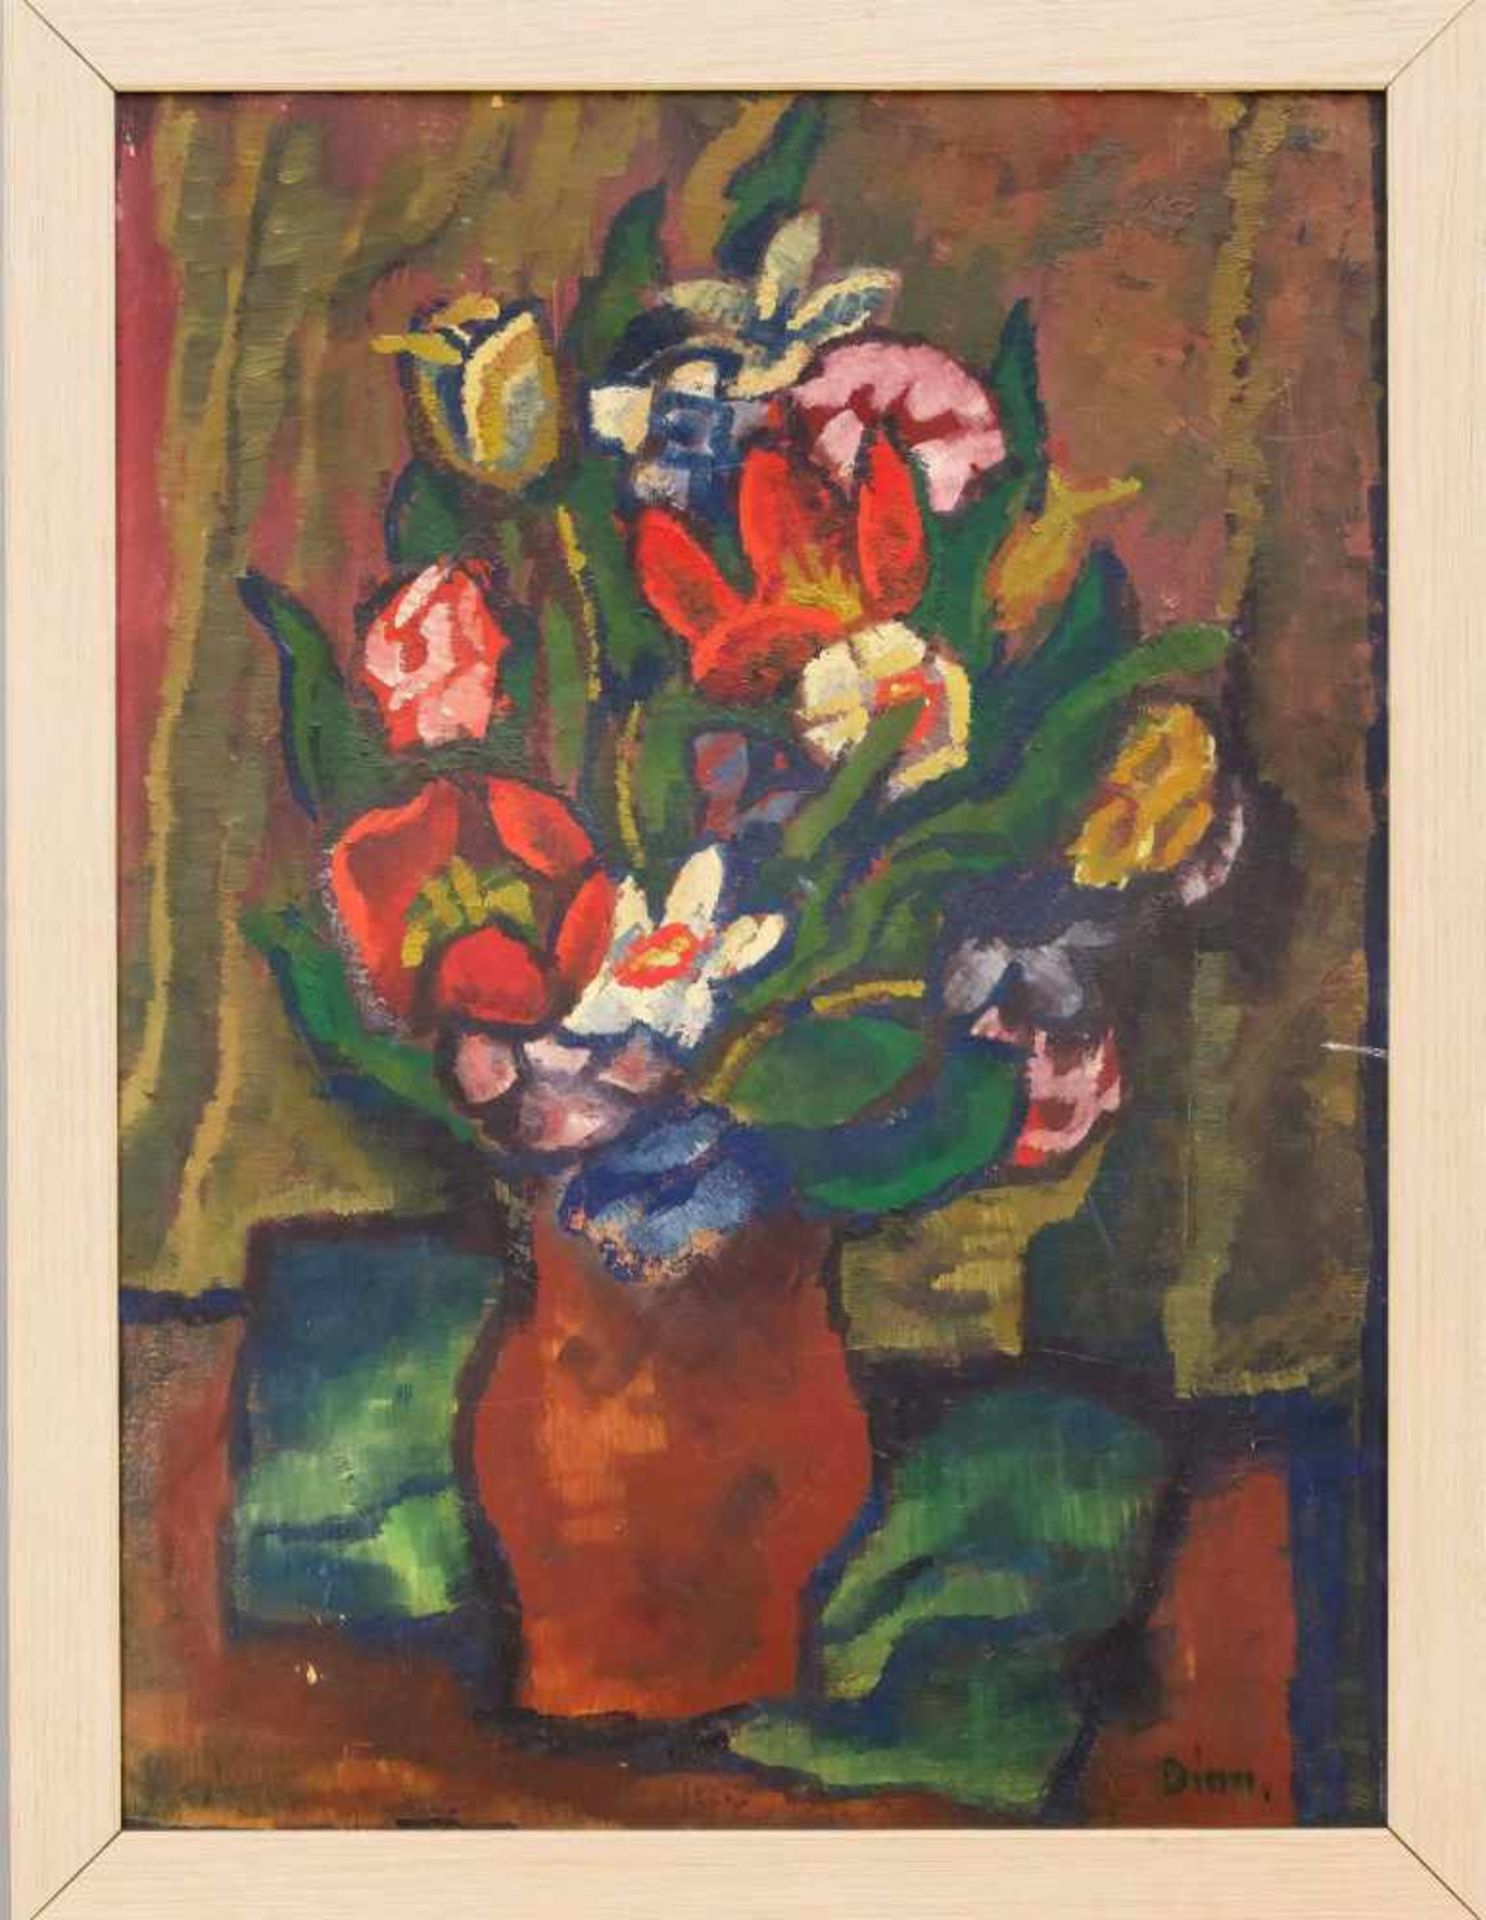 Unidentified expressionist mid 20th century, floral still life, oil on cardboard, and thelike. re.